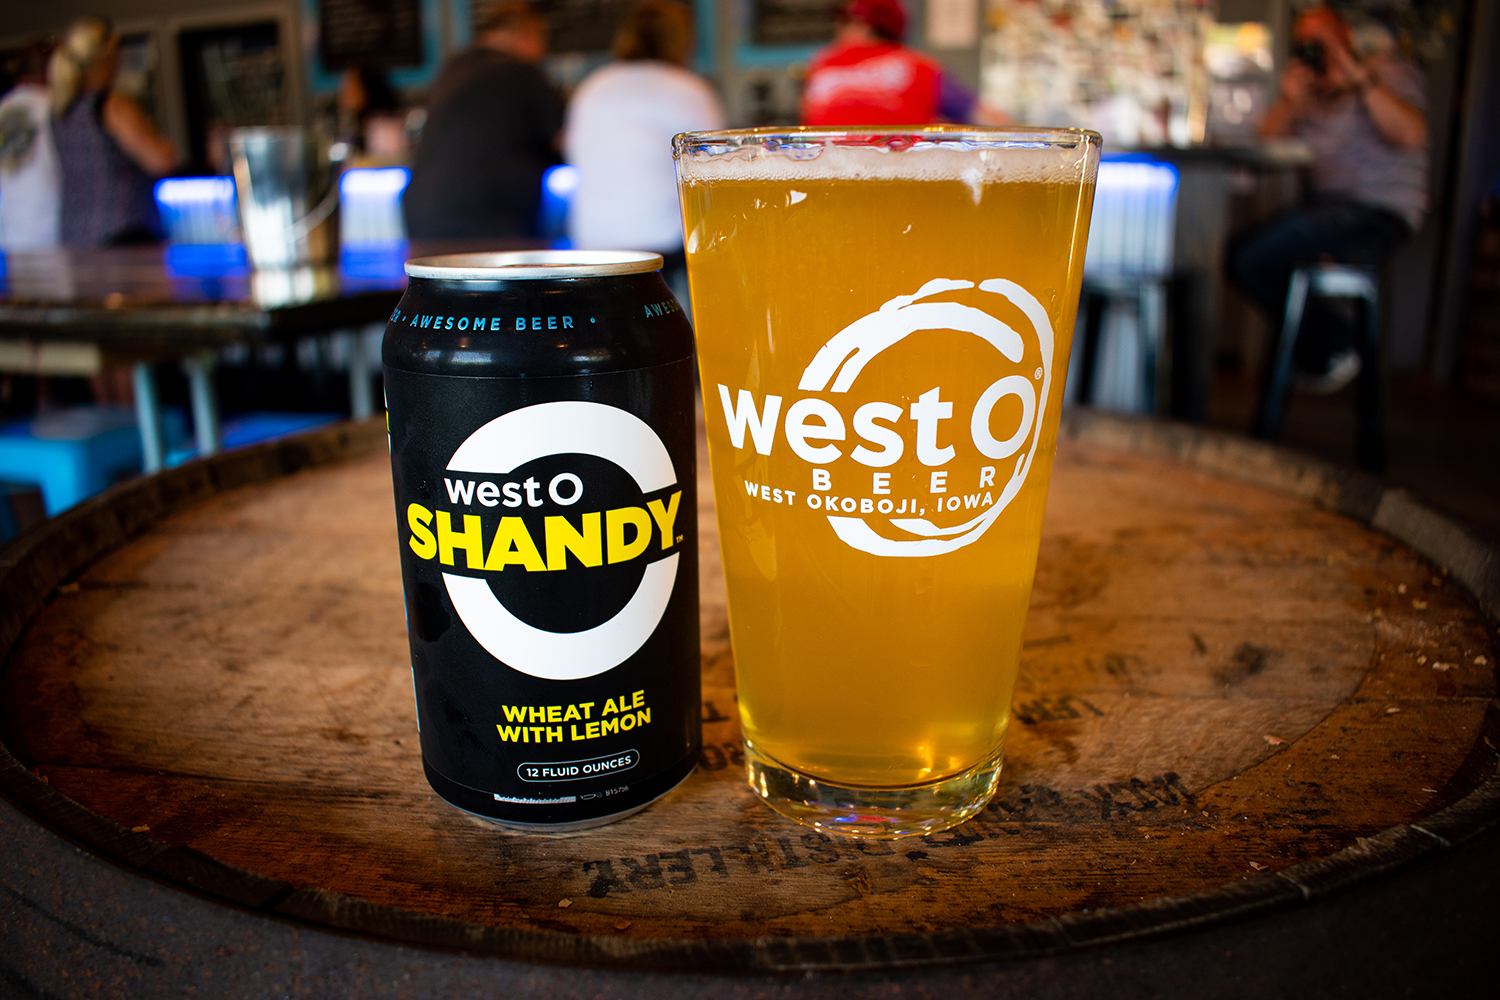 West O Beer proudly presents SHANDY - Wheat Ale with Lemon